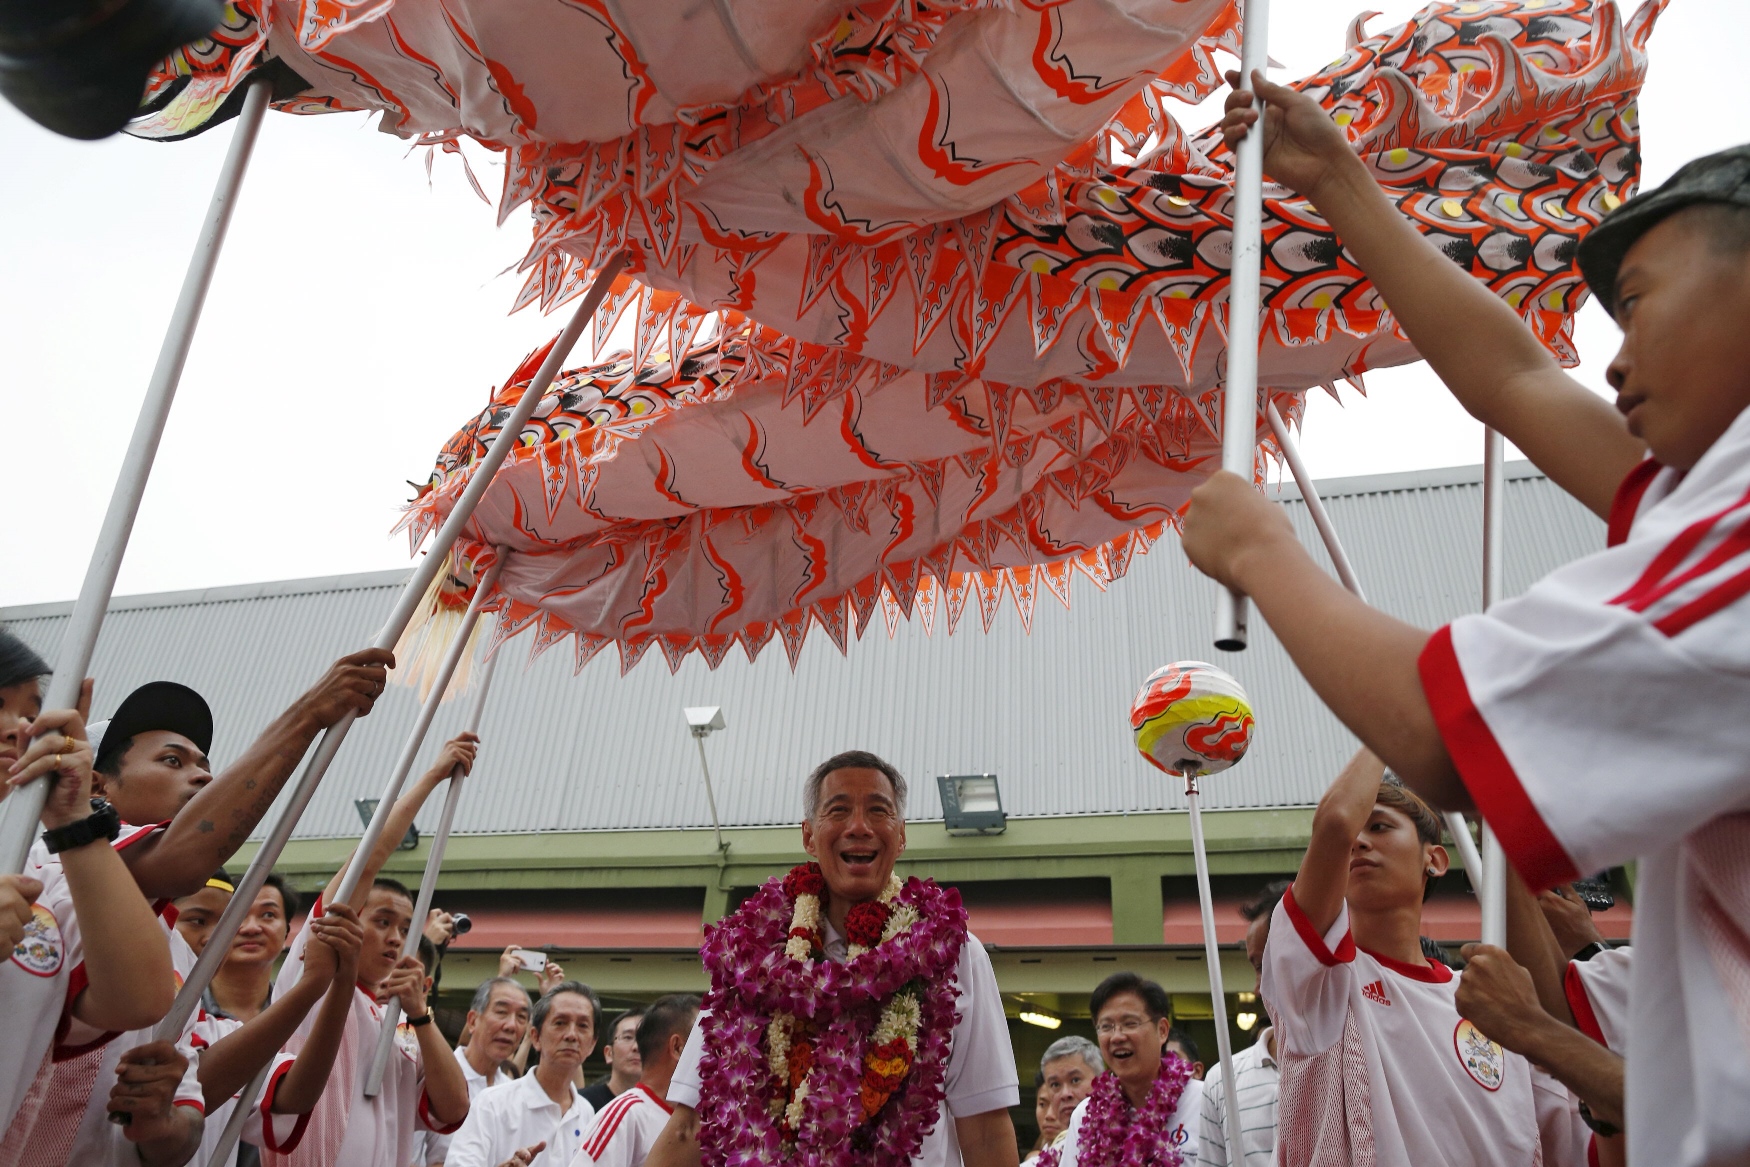 singapore 039 s prime minister and secretary general of the people 039 s action party pap lee hsien loong c is greeted by a dragon dance as he thanks supporters after the general election in singapore september 12 2015 photo reuters